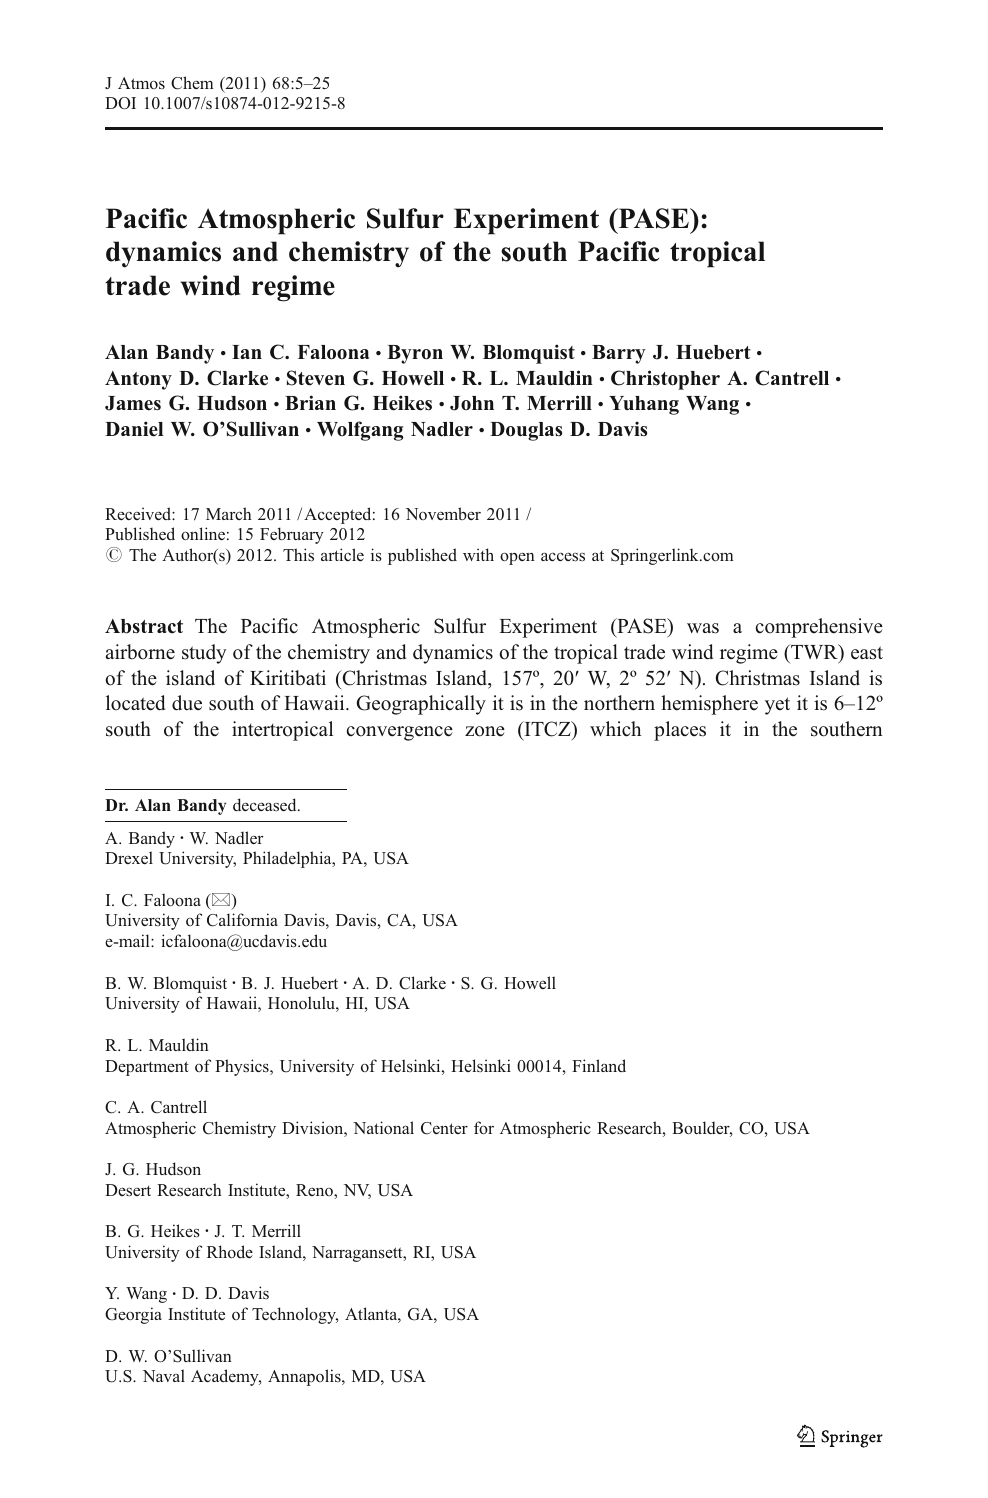 Pacific Atmospheric Sulfur Experiment Pase Dynamics And Chemistry Of The South Pacific Tropical Trade Wind Regime Topic Of Research Paper In Earth And Related Environmental Sciences Download Scholarly Article Pdf And